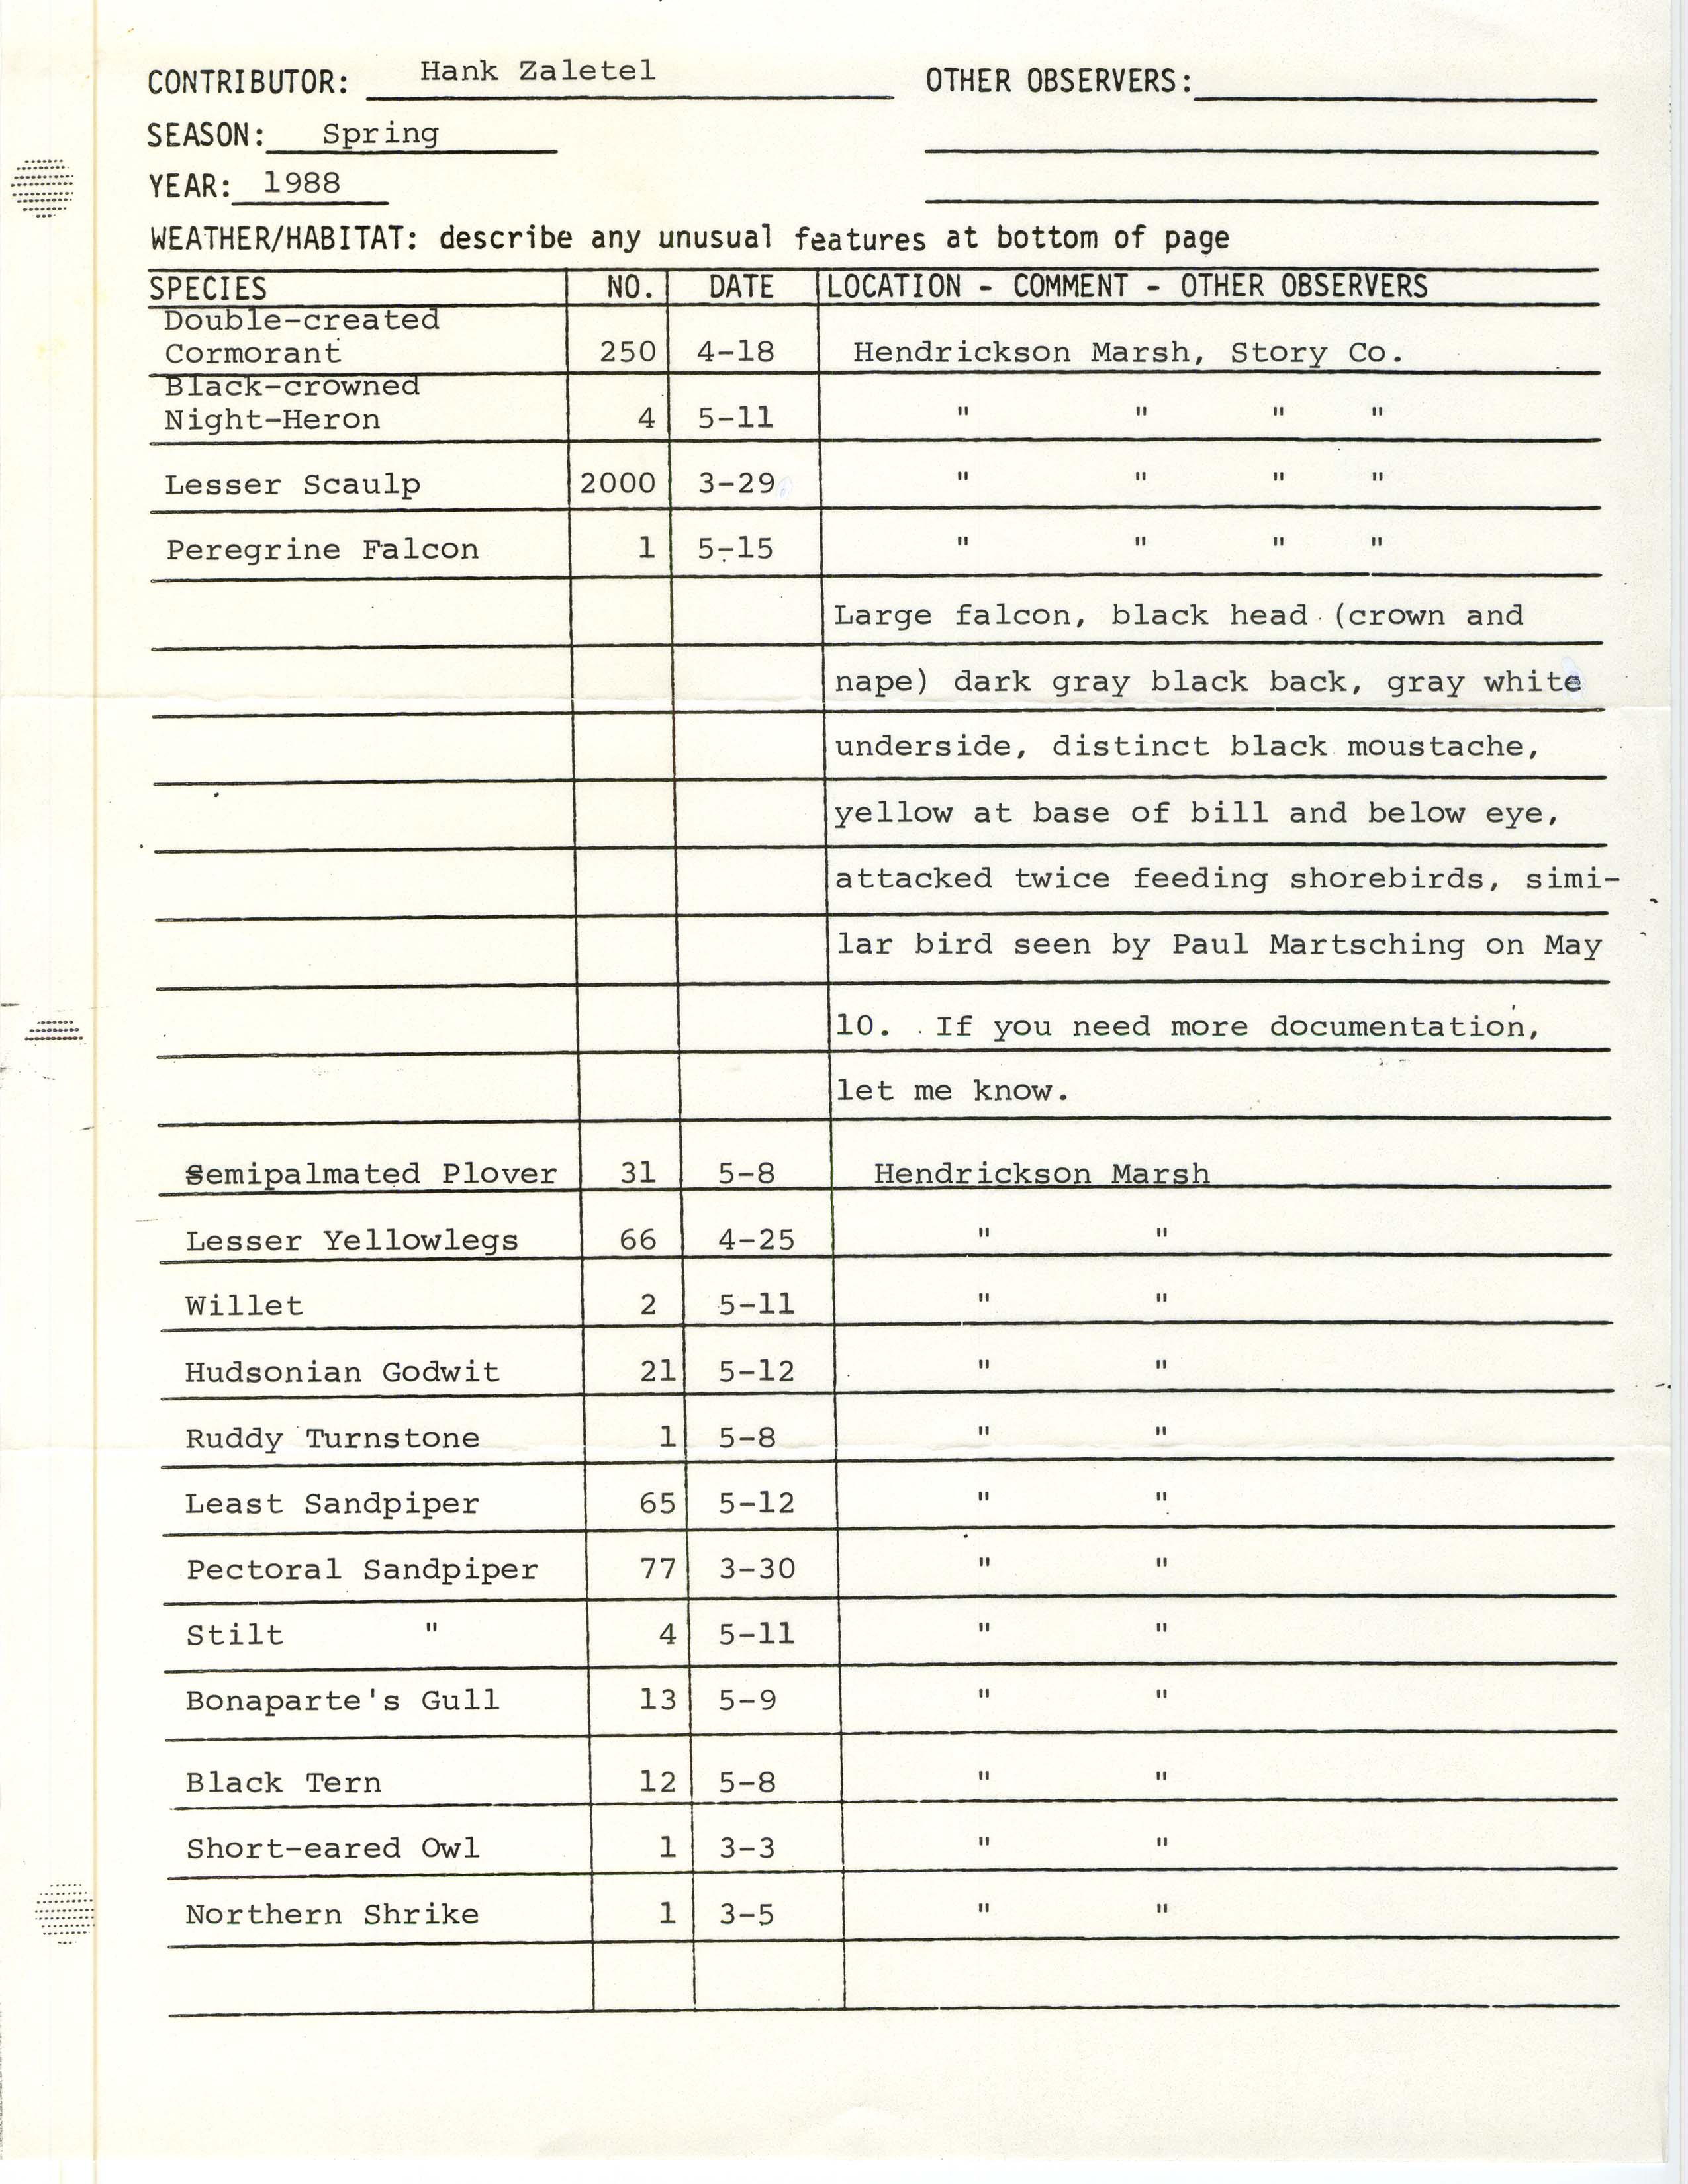 Field notes contributed by Hank Zaletel, spring 1988